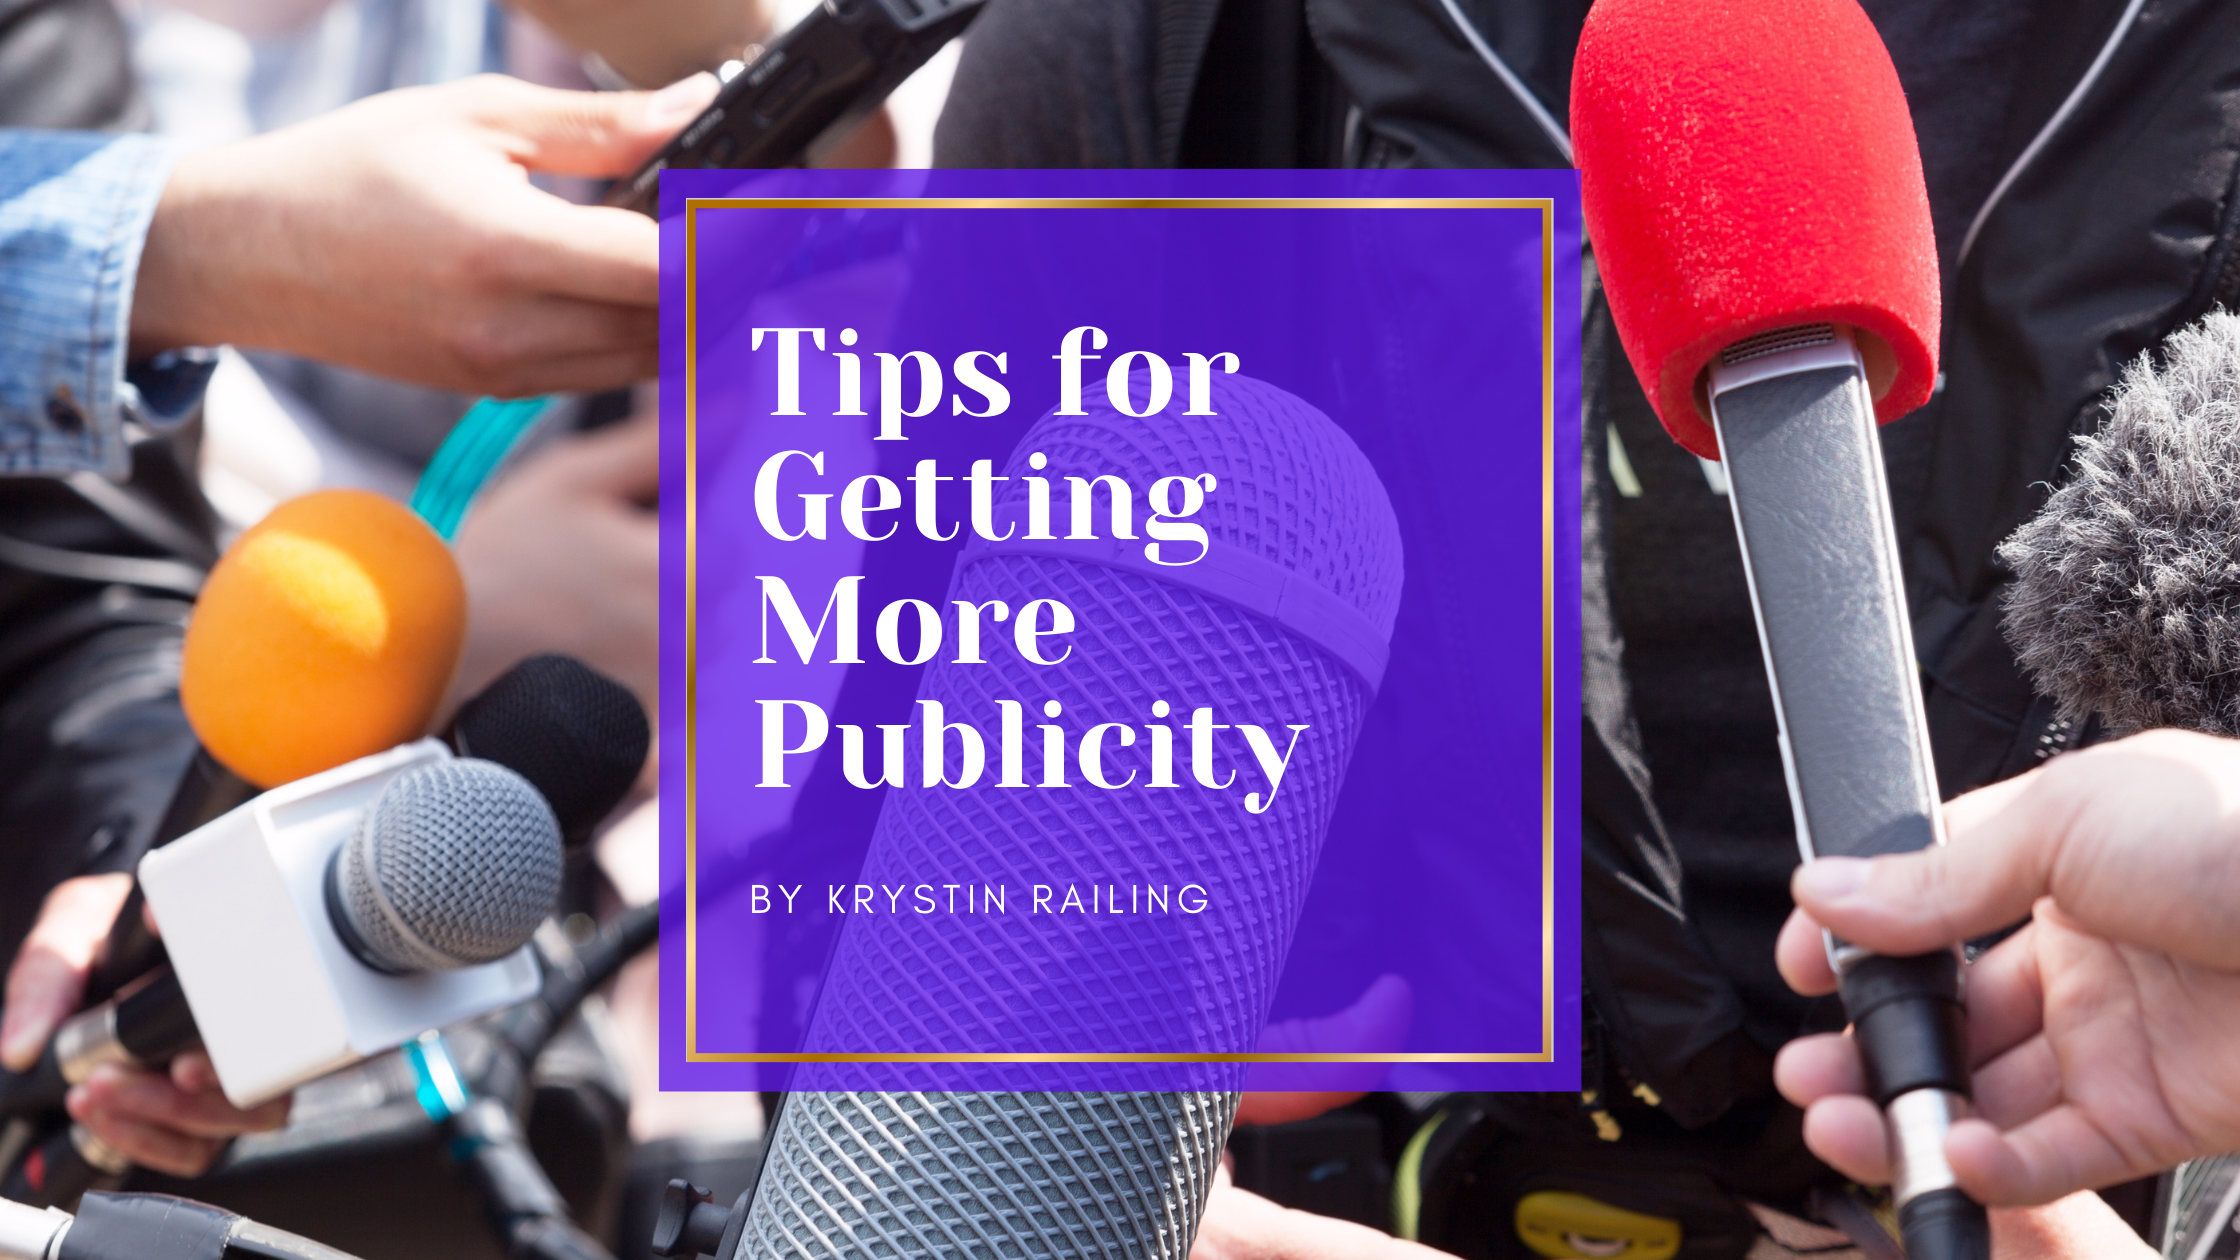 Tips for Getting More Publicity